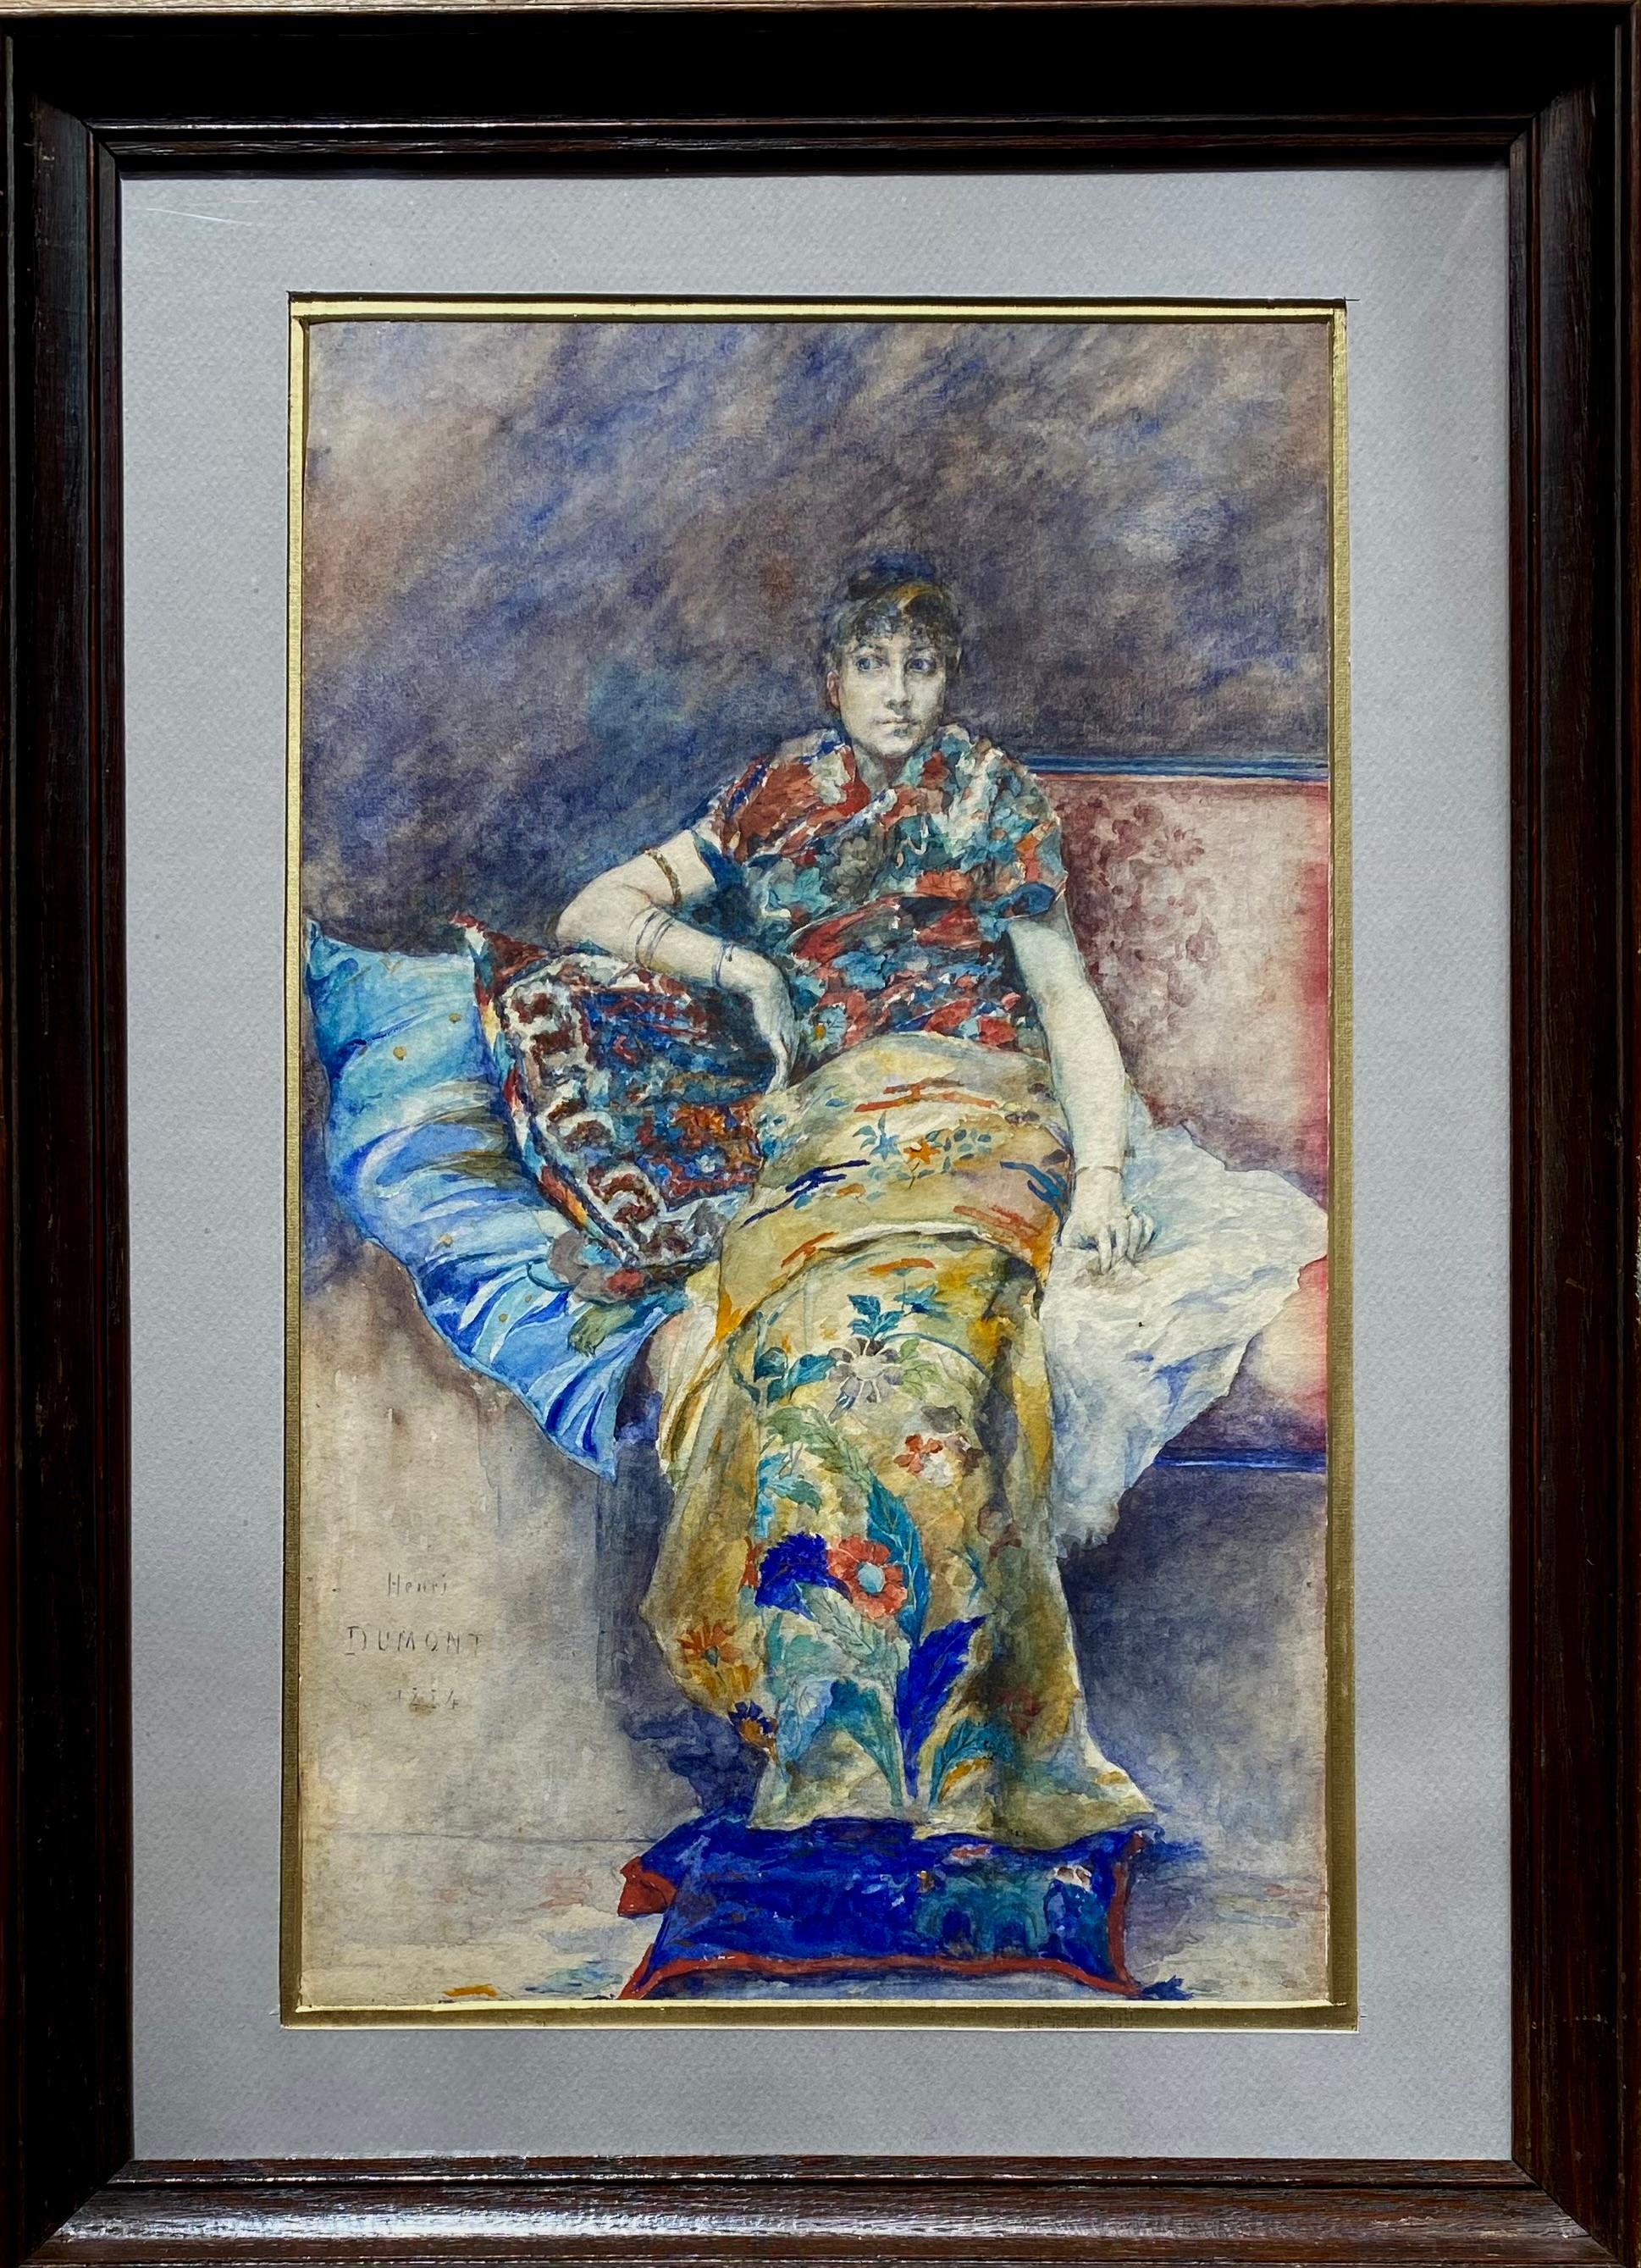 Henri Courselles-Dumont Portrait - Woman in japonist dress seated on a sofa